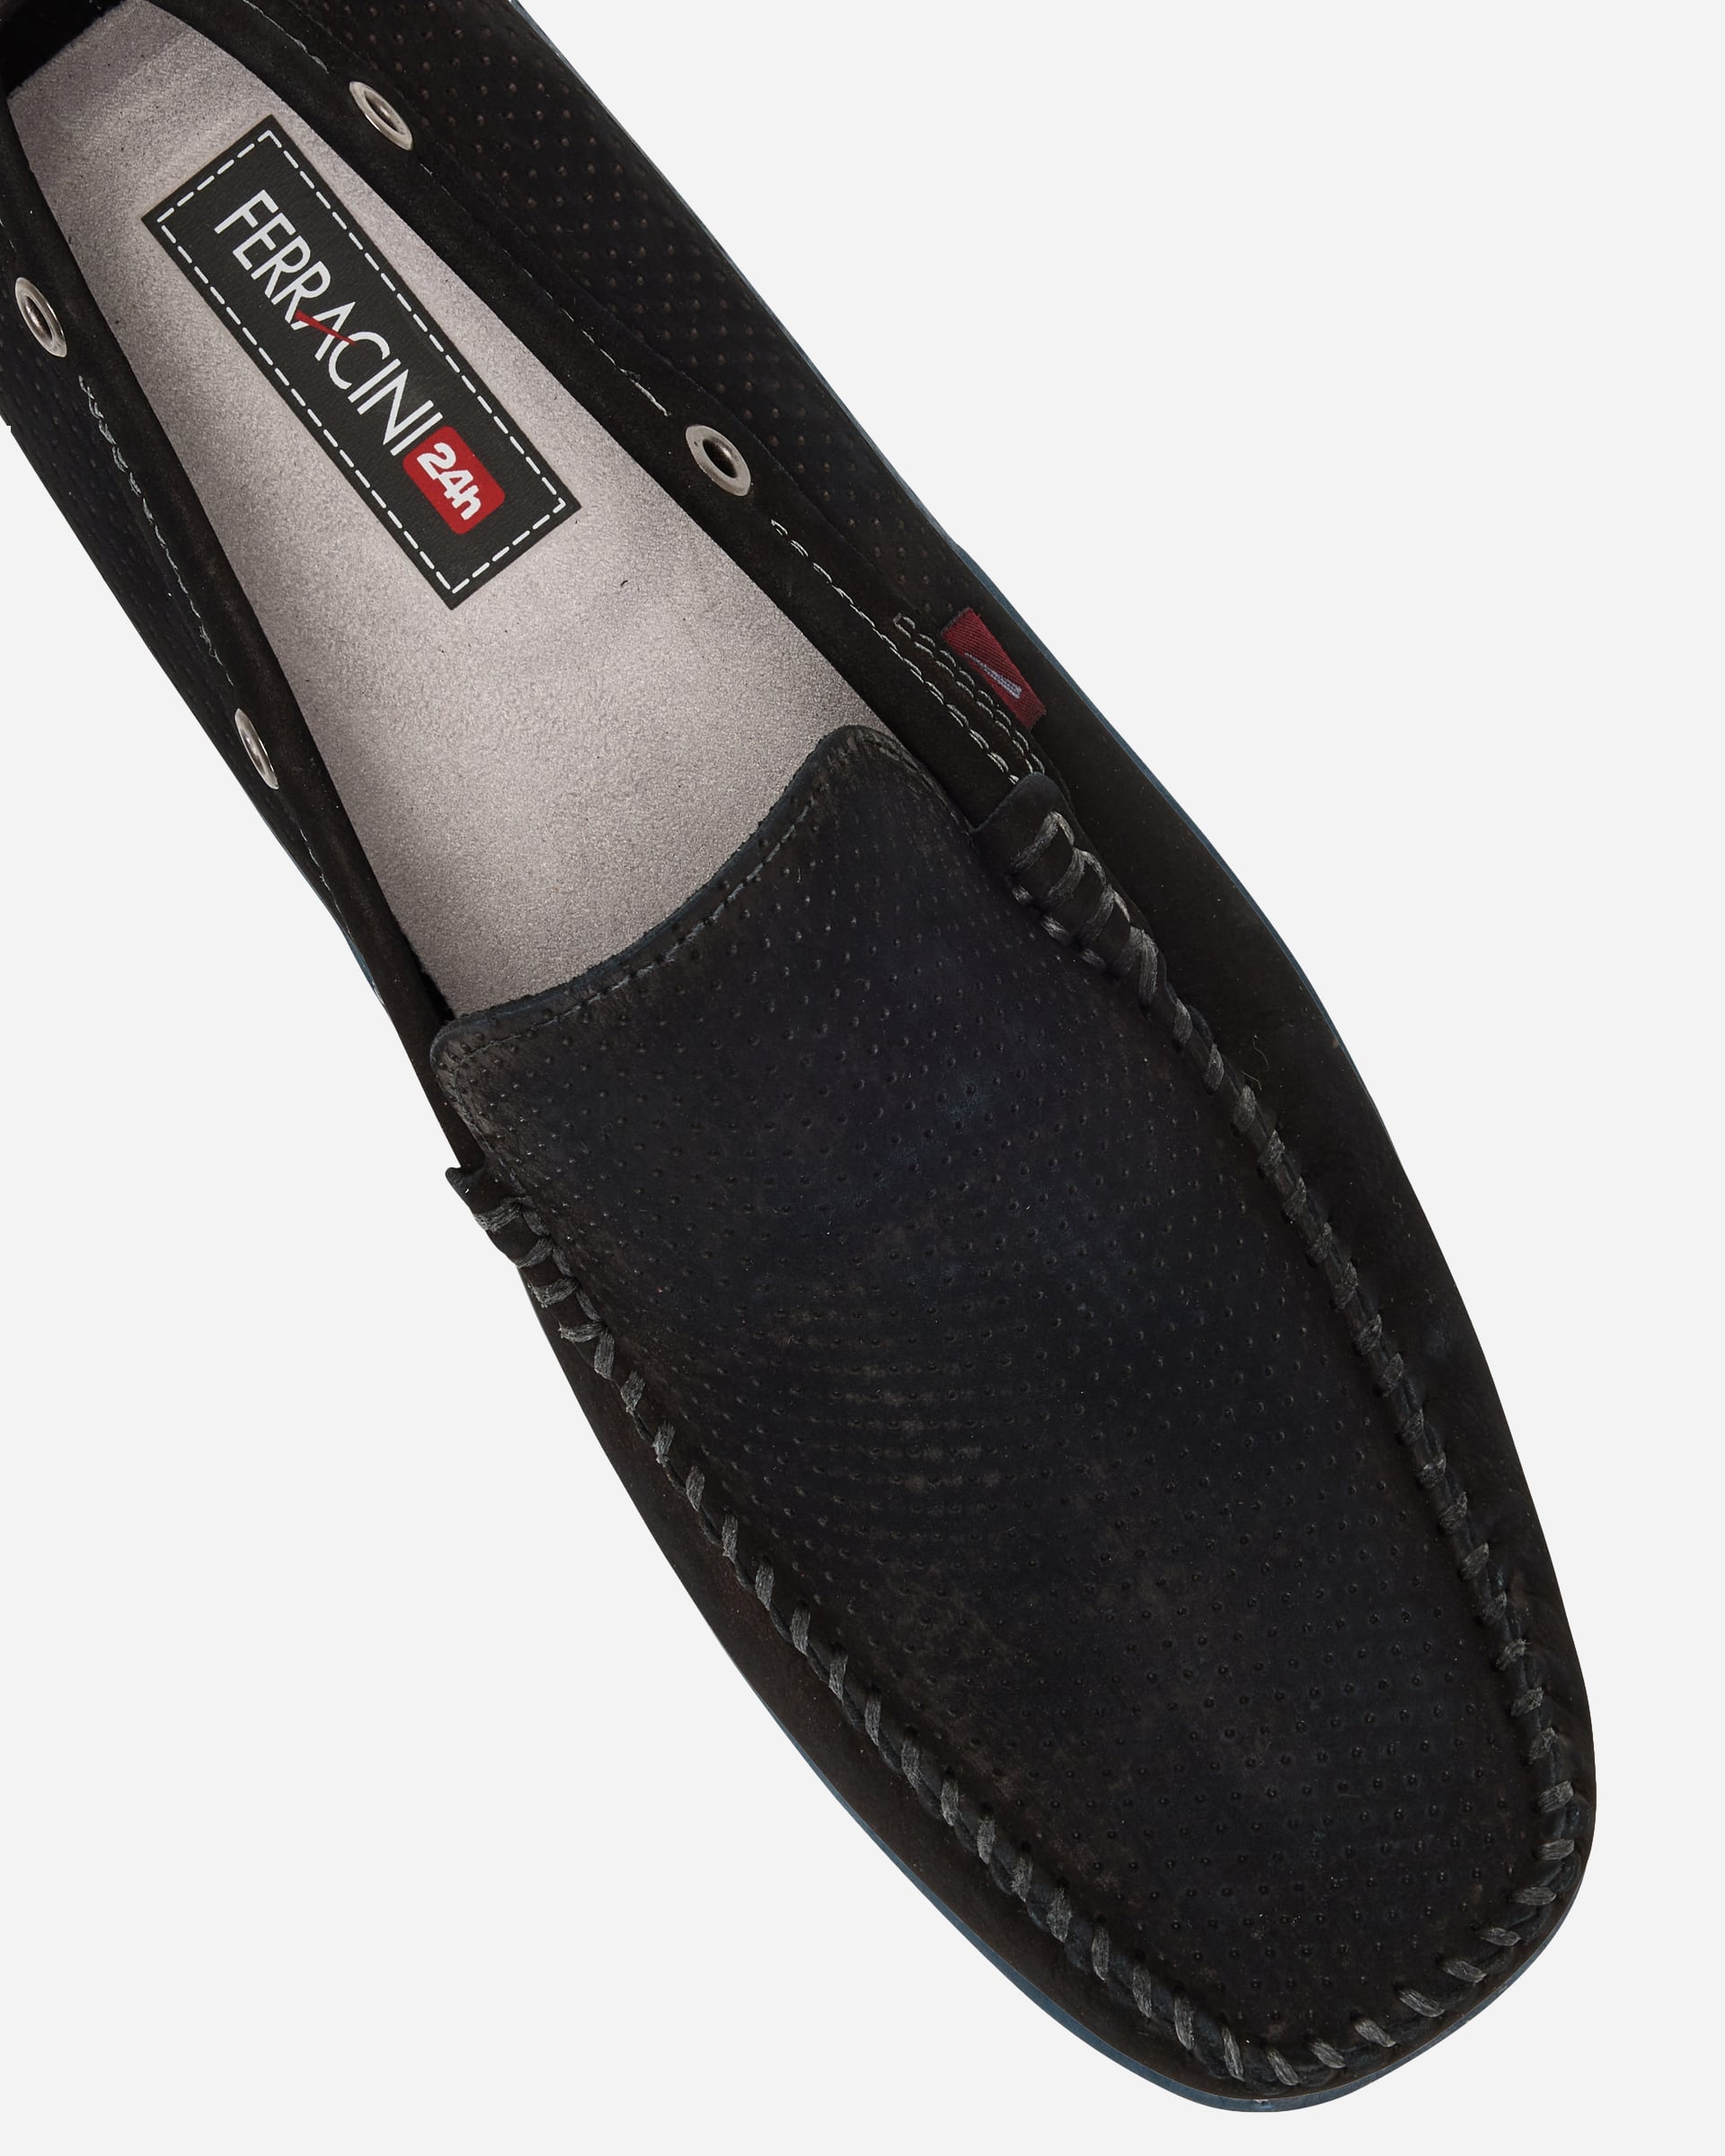 Xavius Loafers - Men's Loafers at Menzclub